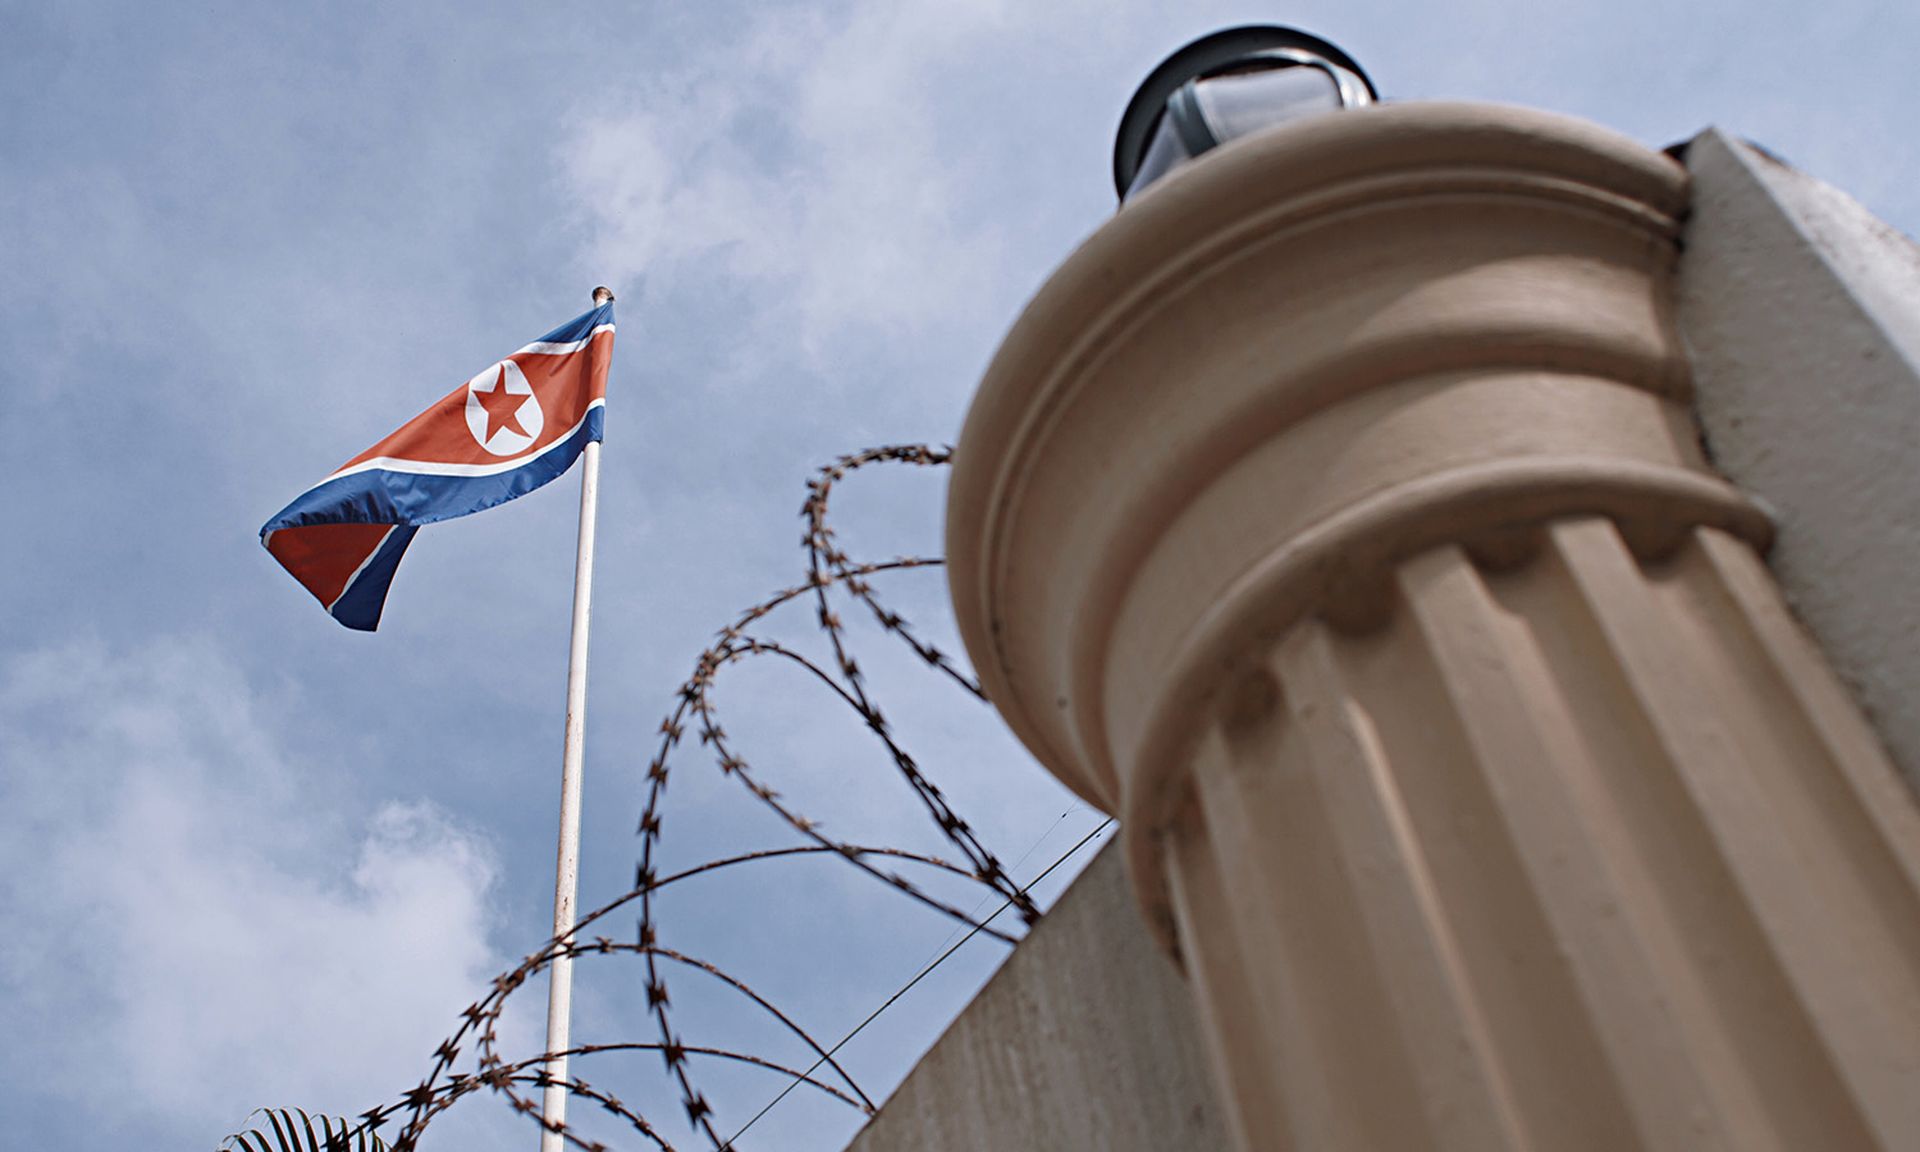 A North Korean flag is seen at the North Korean Embassy compound on Feb. 22, 2017, in Kuala Lumpur, Malaysia. (Photo by Rahman Roslan/Getty Images)